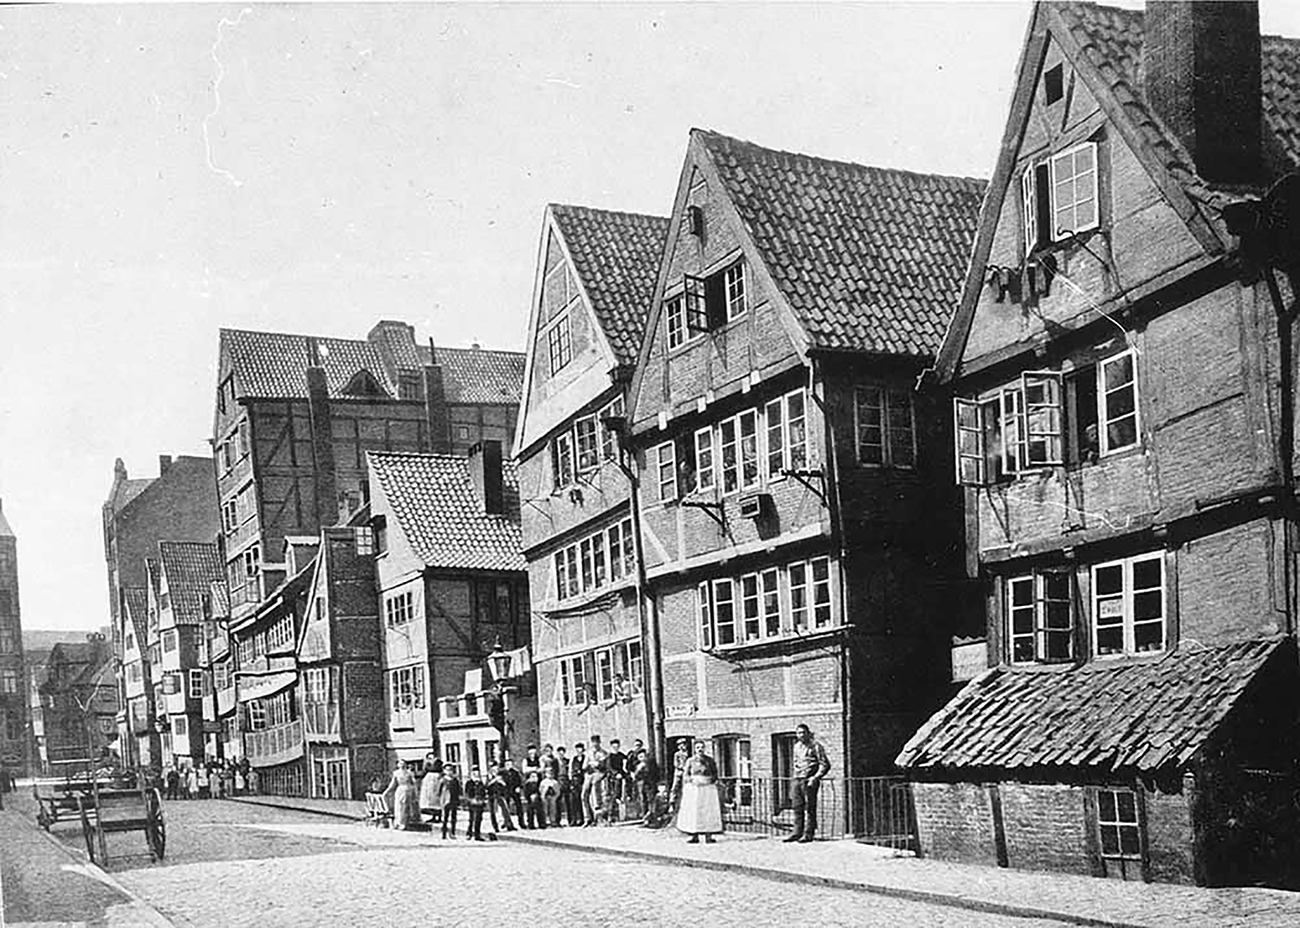 The old residential buildings on Brooksgraben. Starting in 1883, the residential neighborhoods on the Elbe islands of Kehrwieder and Wandrahm were demolished to make way for Speicherstadt. About 20,000 people were forcibly relocated and about 1,100 houses were demolished. © BKM